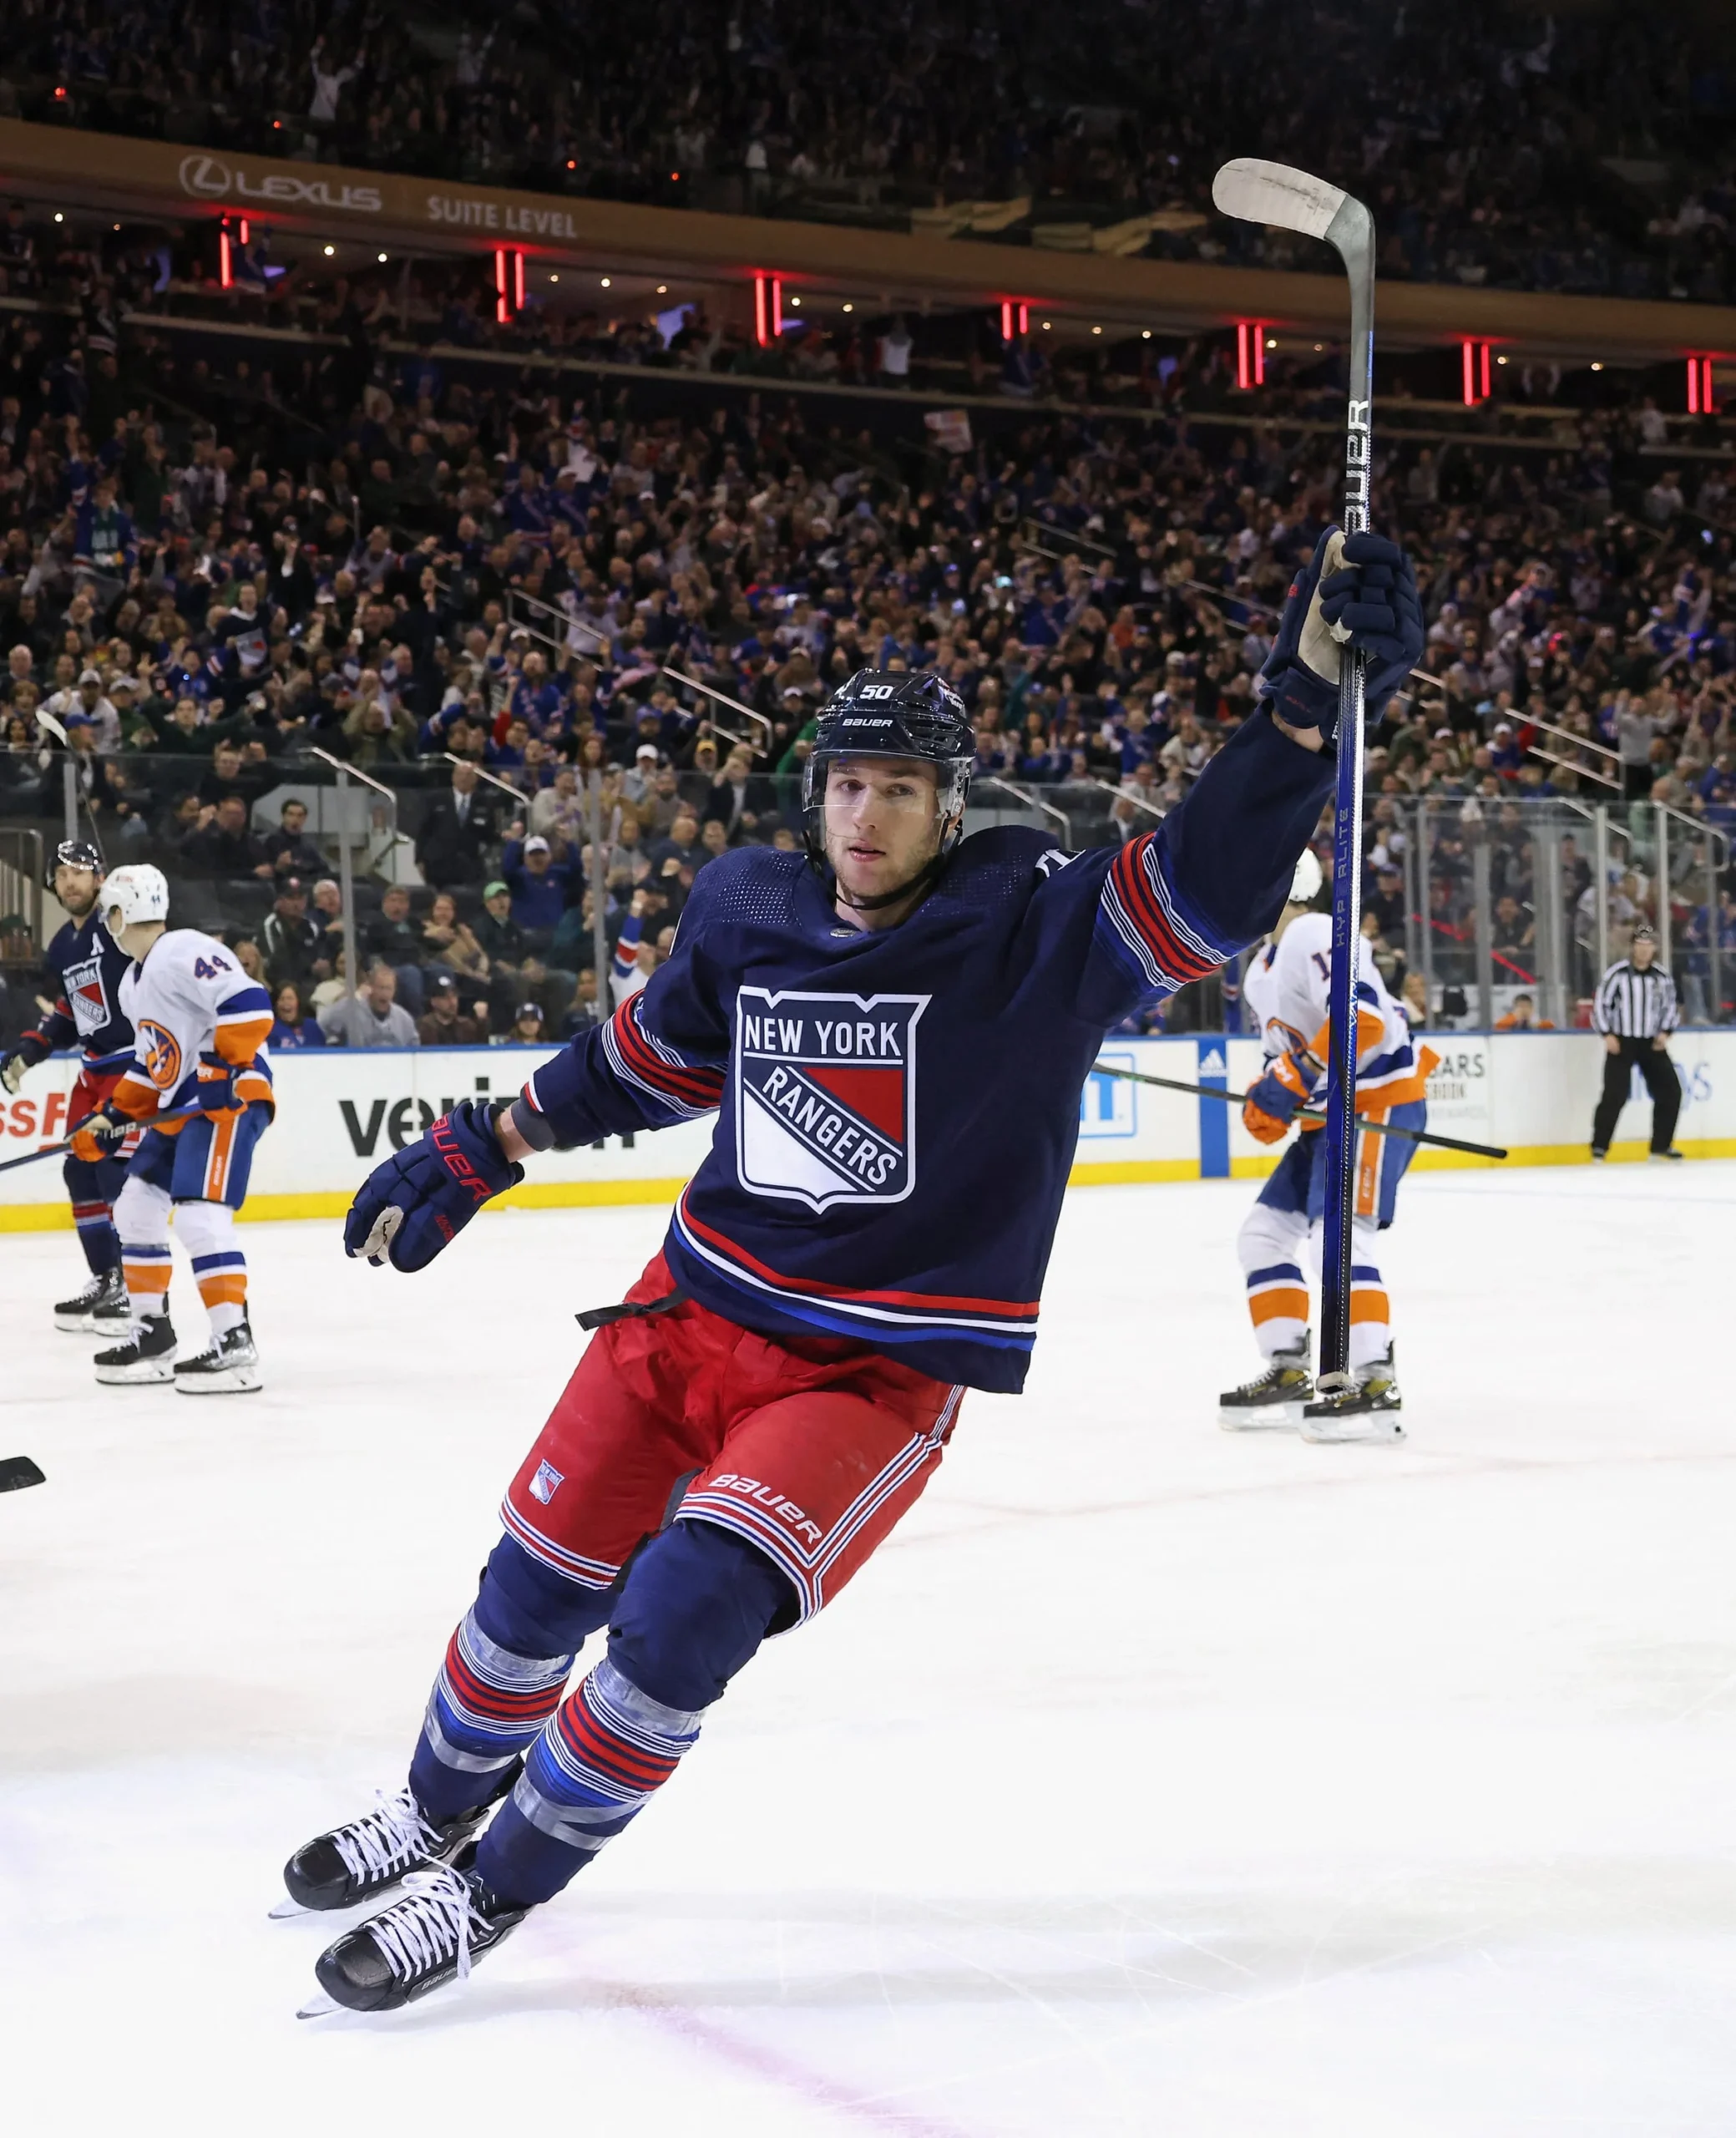 Betting on Upsets: Rangers Win, Flyers Cover in NHL Picks